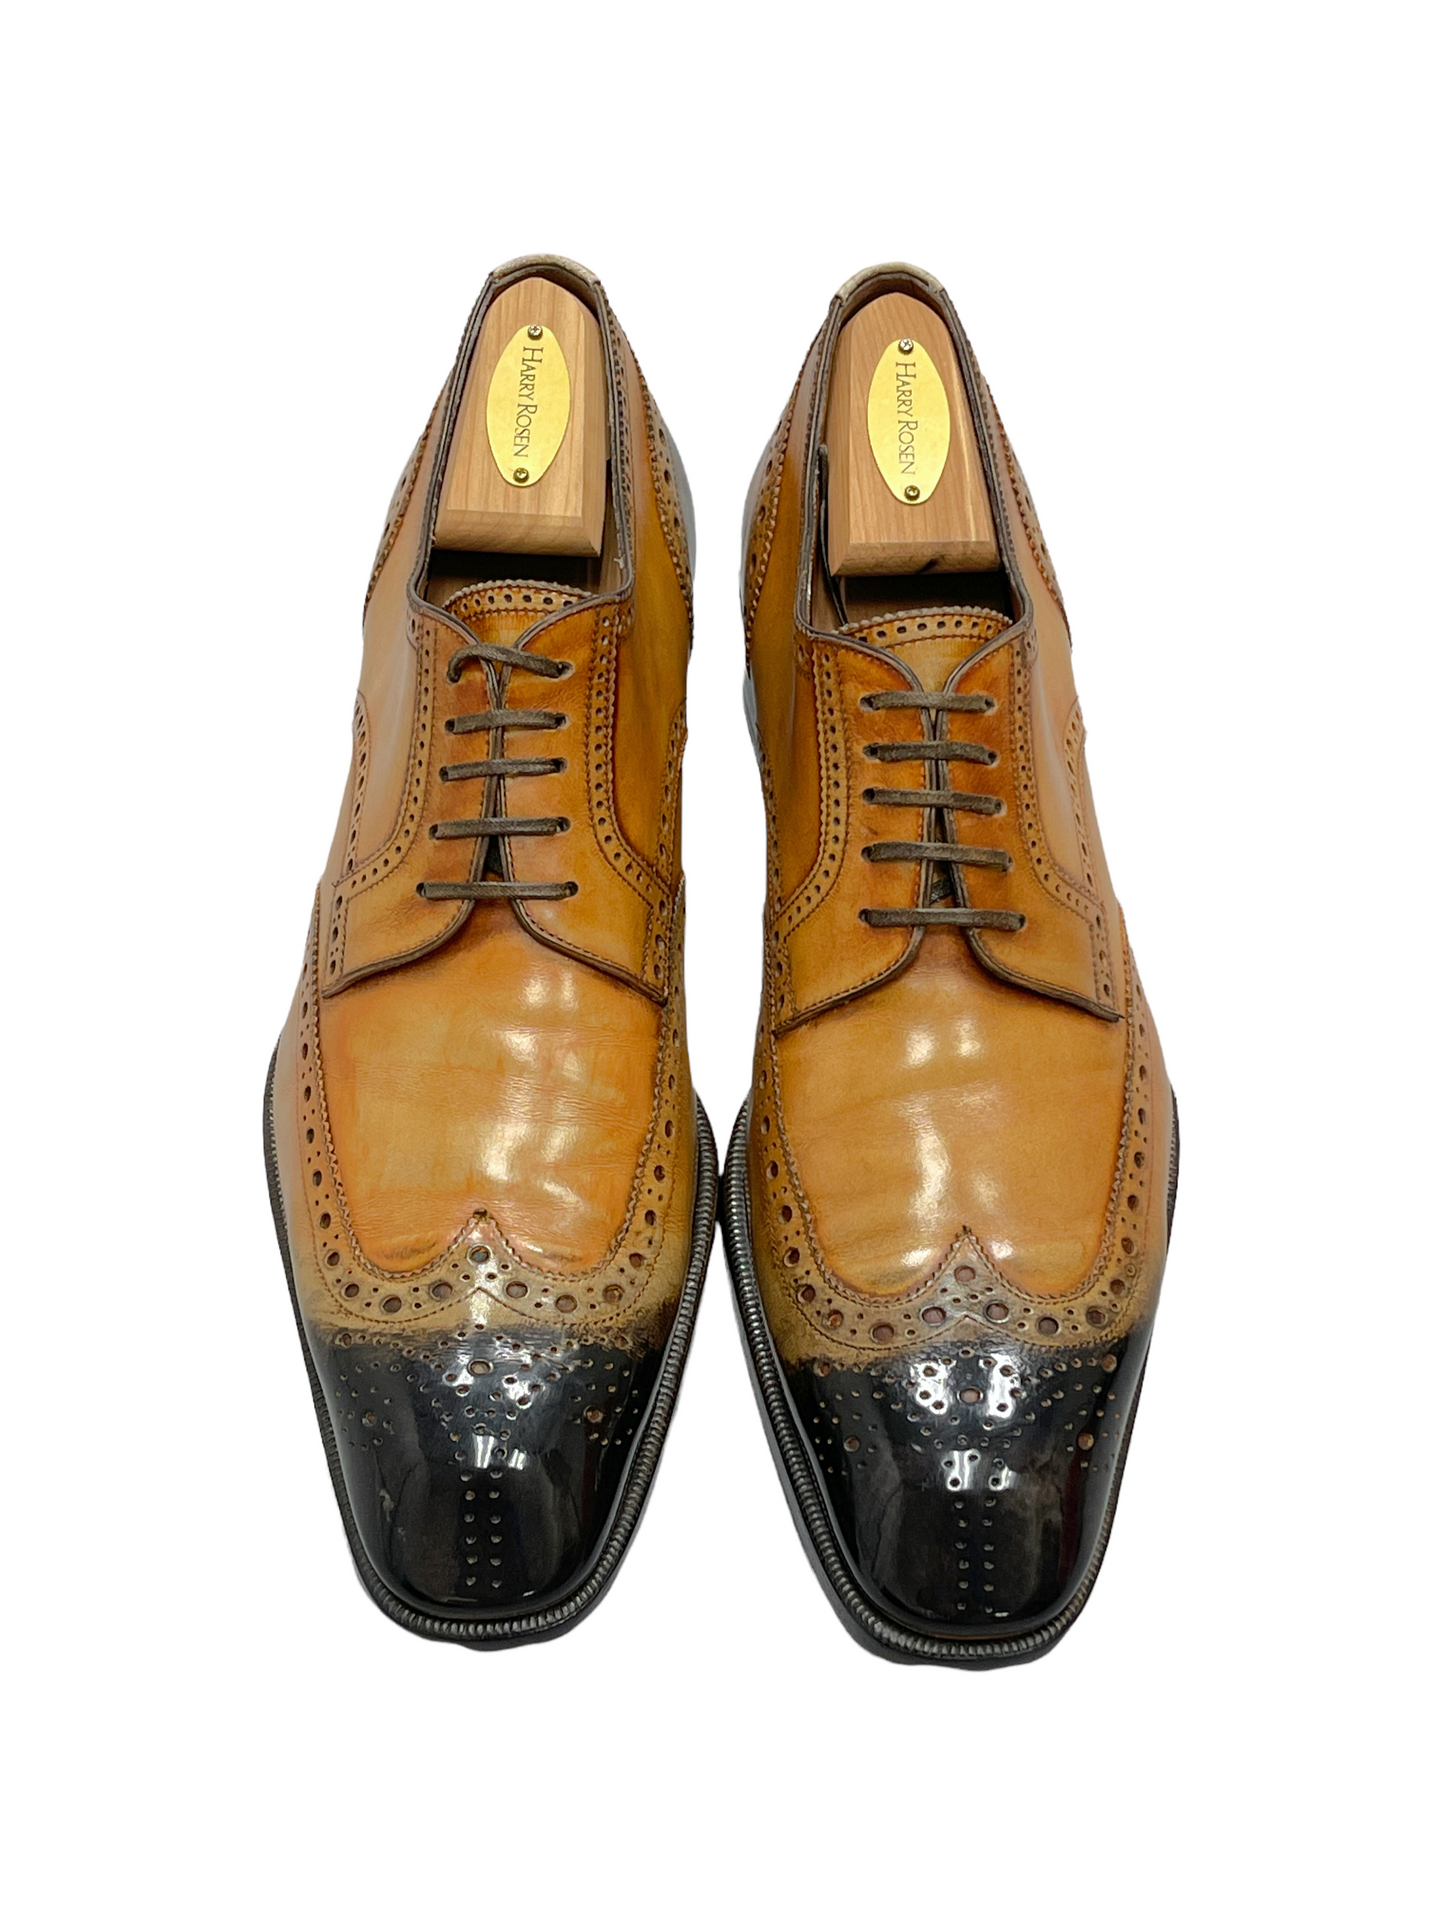 Tom Ford Light Brown Leather Oxford Dress Shoe 8.5 D US — Genuine Design luxury consignment Calgary, Canada New & pre-owned clothing, shoes, accessories.